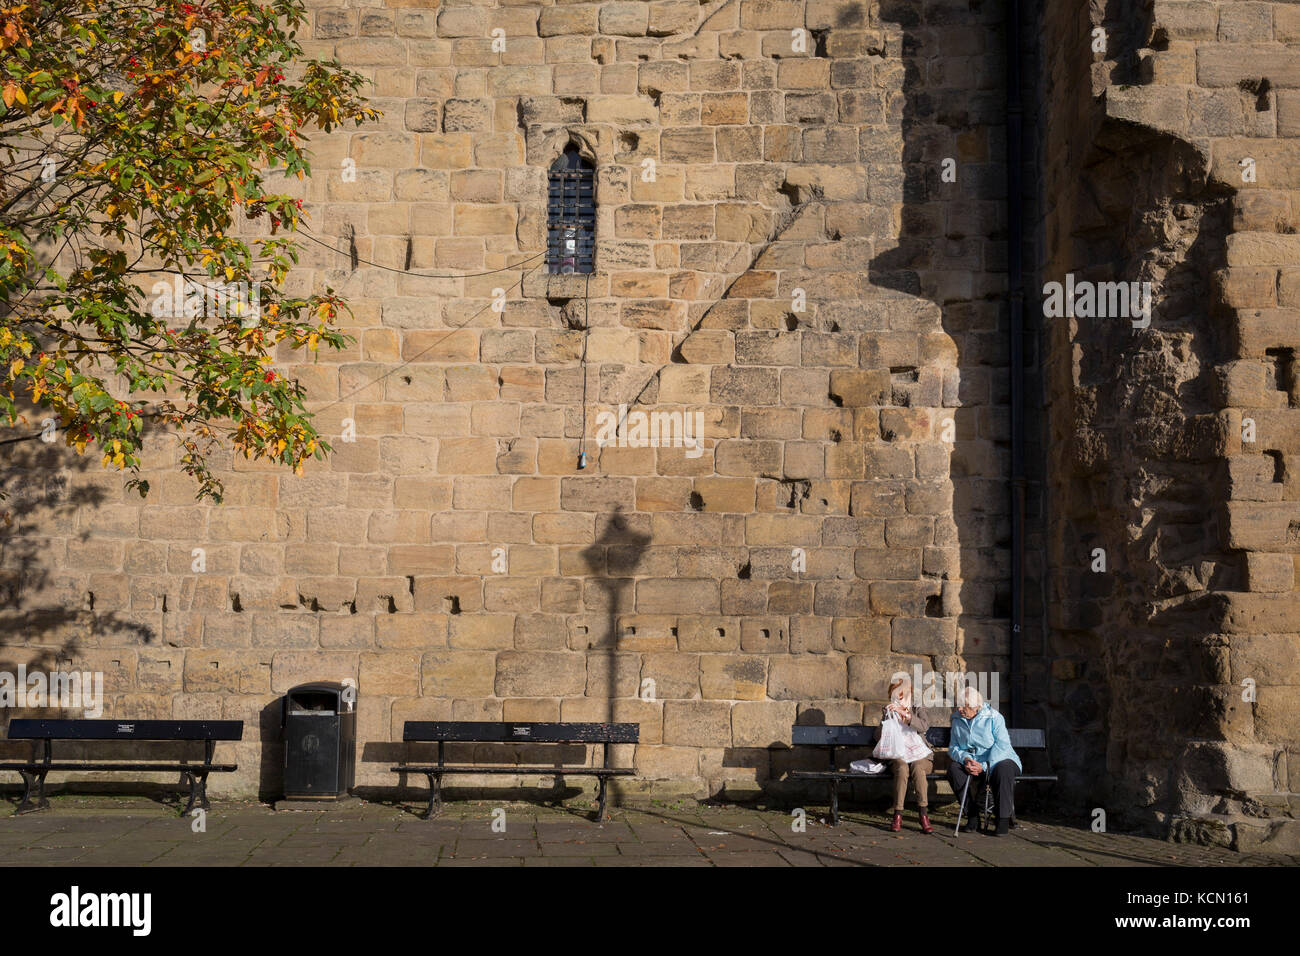 Locals sit in afternoon sunshine beneath the tall outer wall of Hexham's Moot Hall, on 29th September 2017, in Hexham, Northumberland, England. Originally, this gatehouse guarded the hall of the archbishops of York who were the Lords of the manor of Hexham for nearly 500 years until 1545. In later centuries the gatehouse became the setting for the Quarter Sessions of county magistrates and for the meetings of the town's Borough Courts, Since then it has been called the Moot Hall. Stock Photo